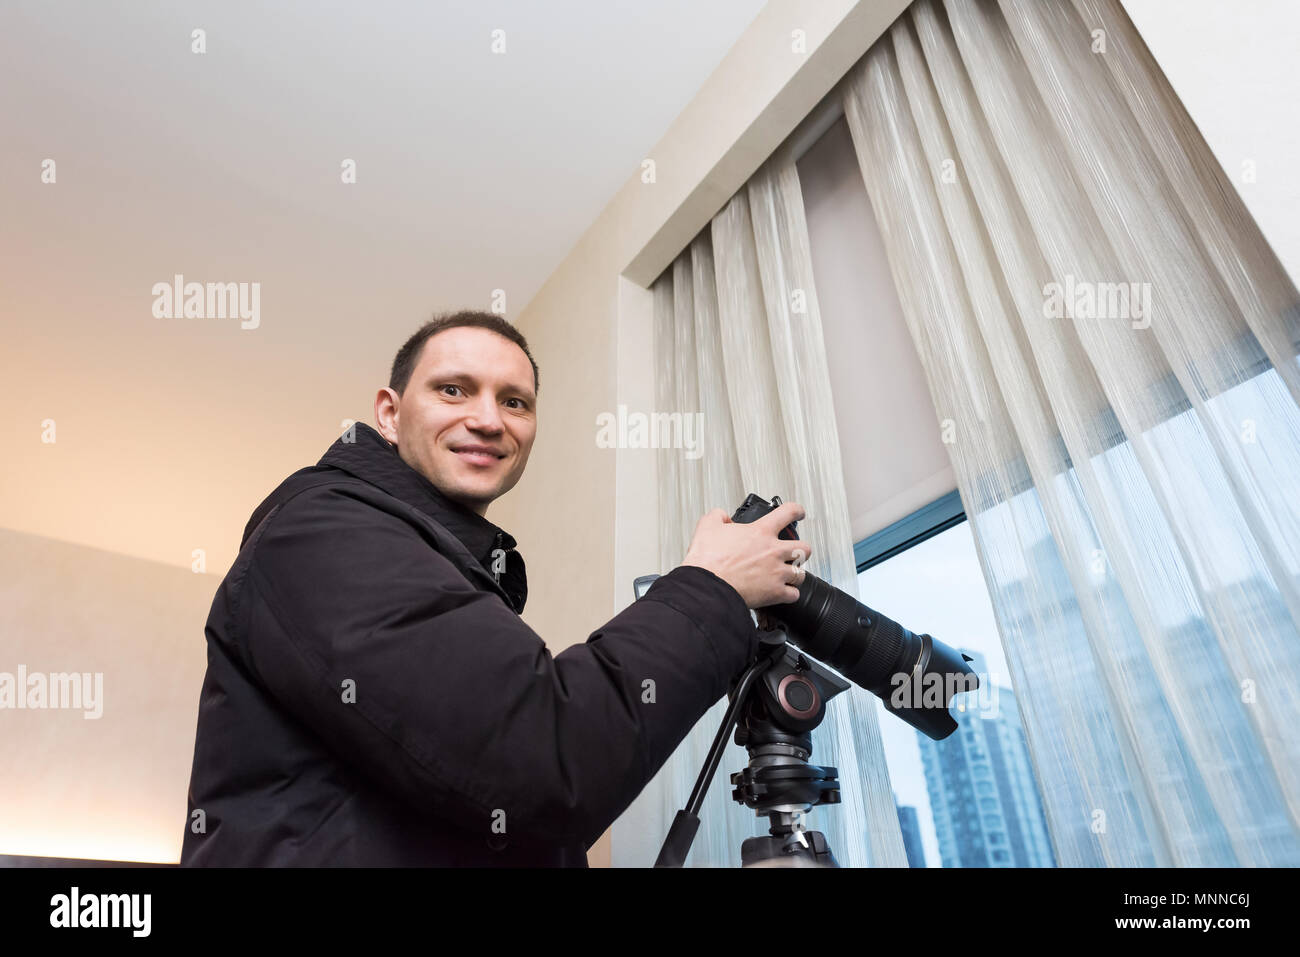 Young happy smiling man photographer with tripod taking pictures inside room of hotel, apartment building through window in New York City, NYC urban Stock Photo